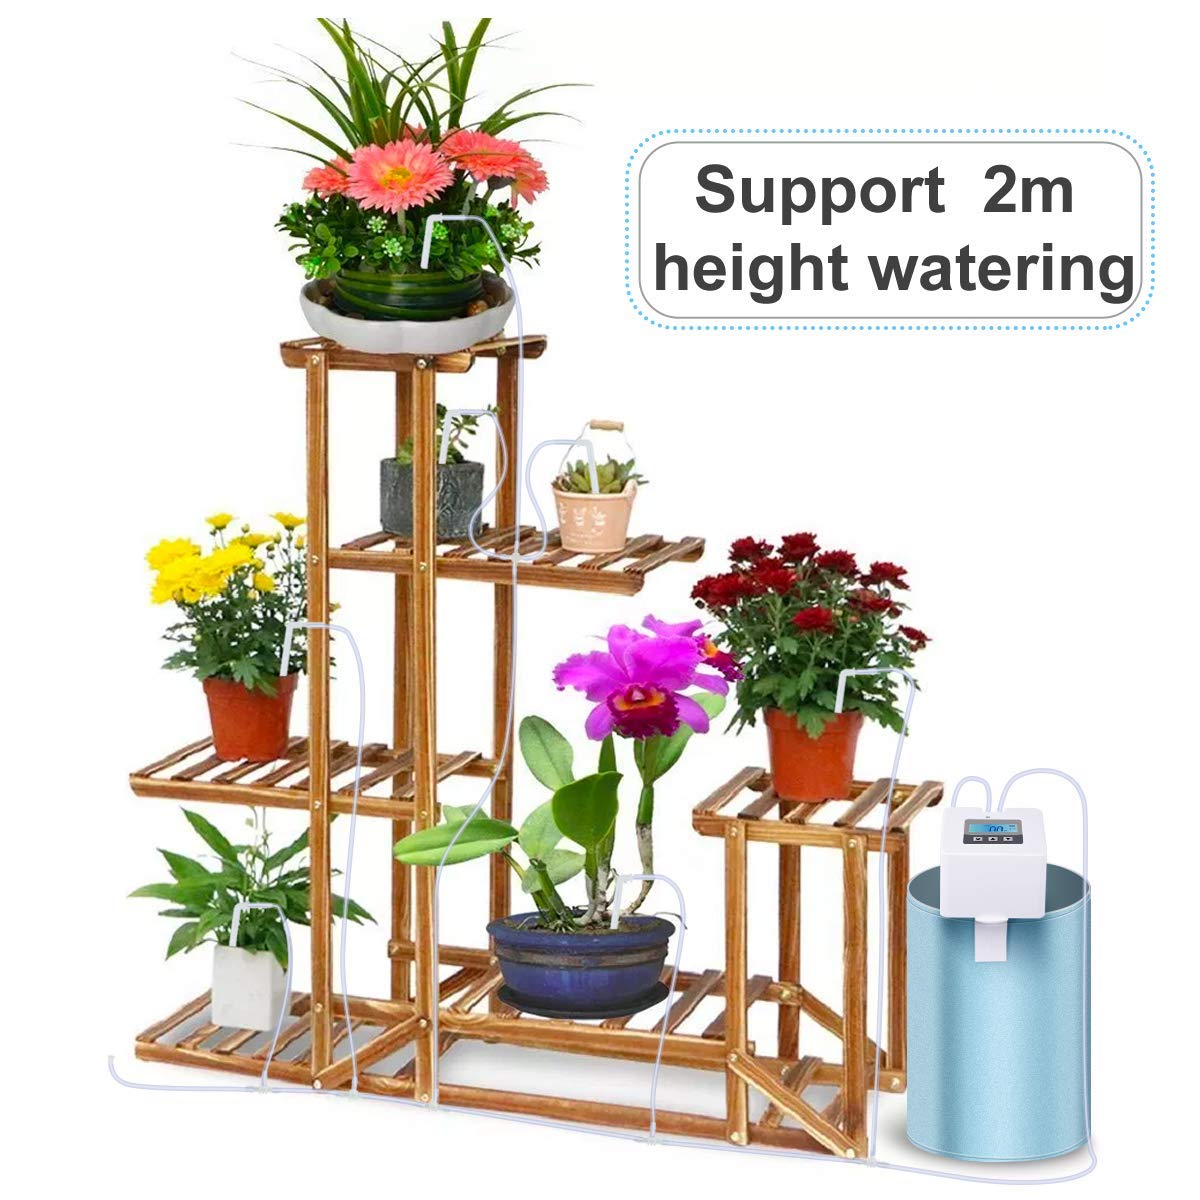 DIY Micro Automatic Drip Irrigation Kit,Houseplants Self Watering System with 30-Day Digital Programmable Water Timer 5V USB Power Operation for Indoor Potted Plants Vacation Plant Watering